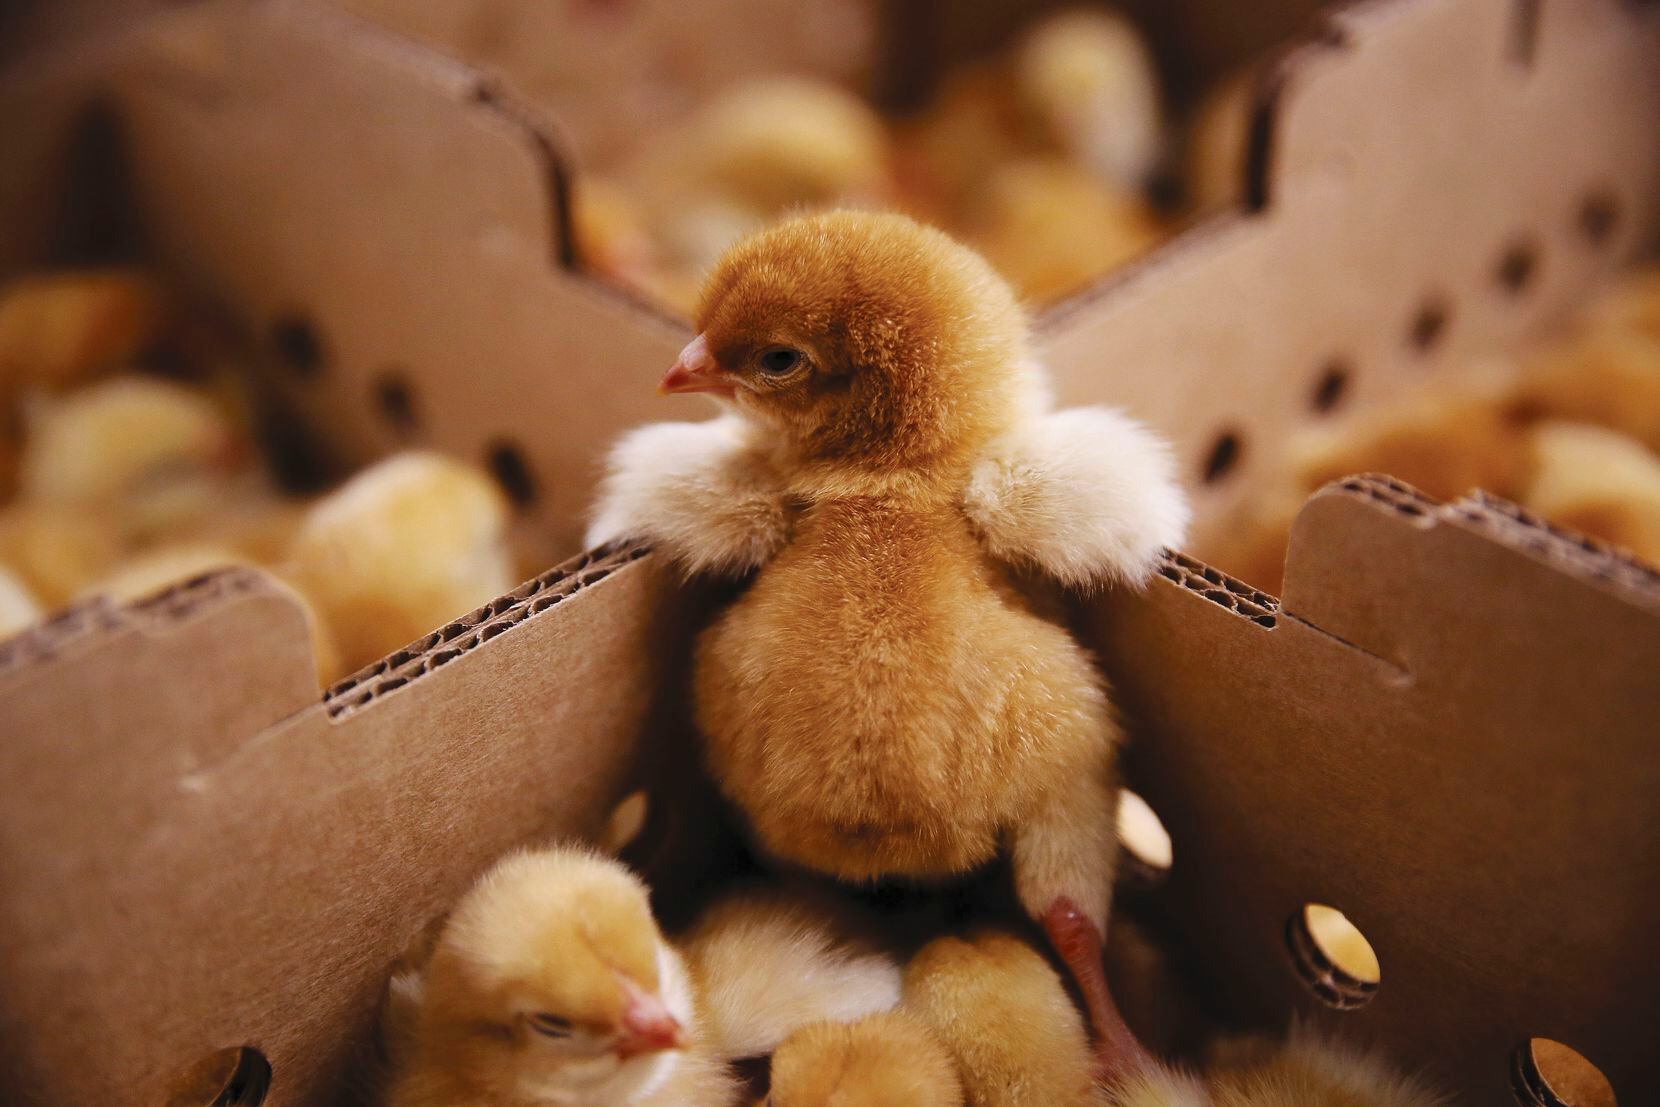 A chick props itself up after being sorted at Freedom Ranger Hatchery in Reinholds, Pa. The business hatched 70,000 chicks Feb. 7, and about 100 Redbro chicks went to Bonton Farms in Dallas. They were ultimately bound for the dinner tables at Cafe Momentum.